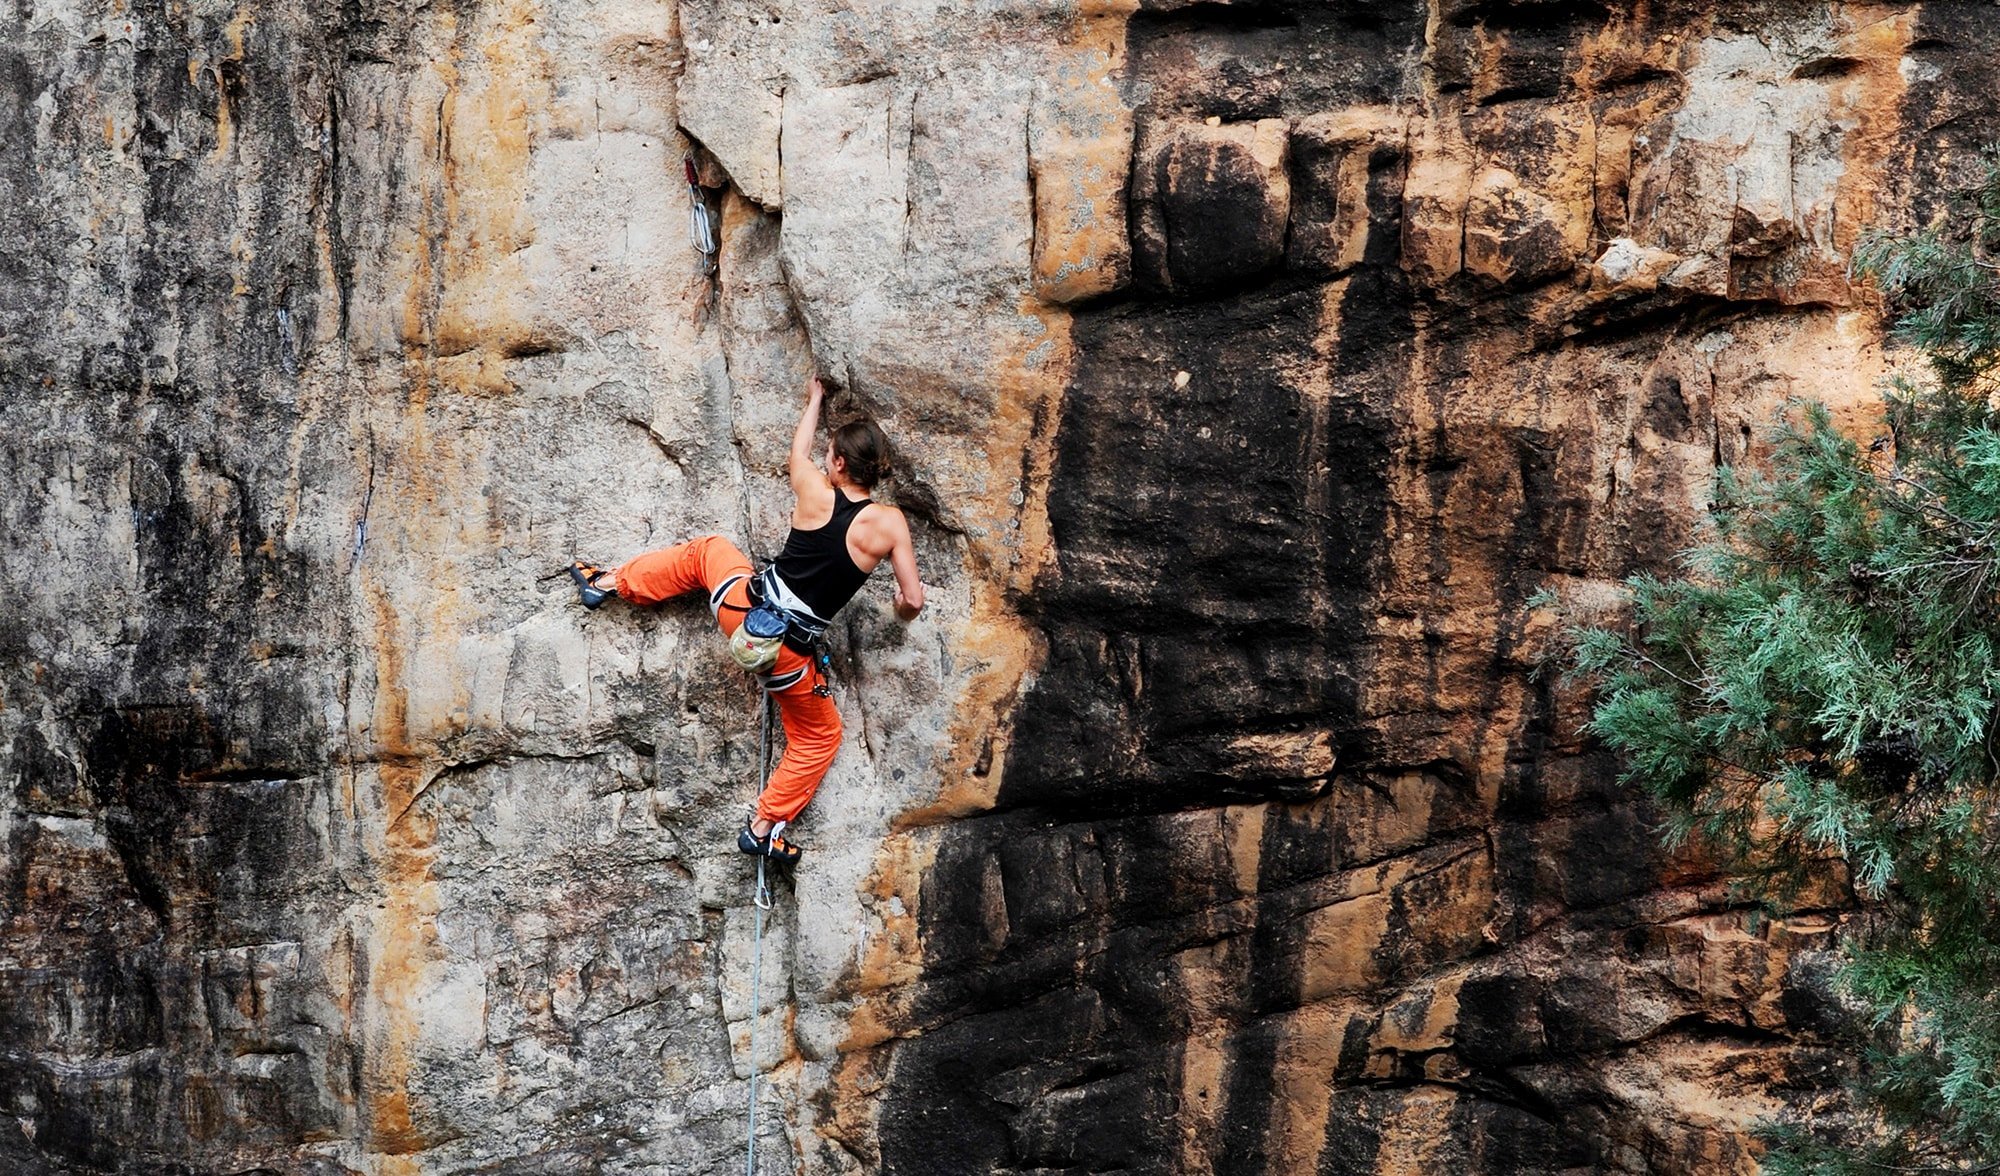 Melbourne women to create Australia's first female-only rock climbing  festival